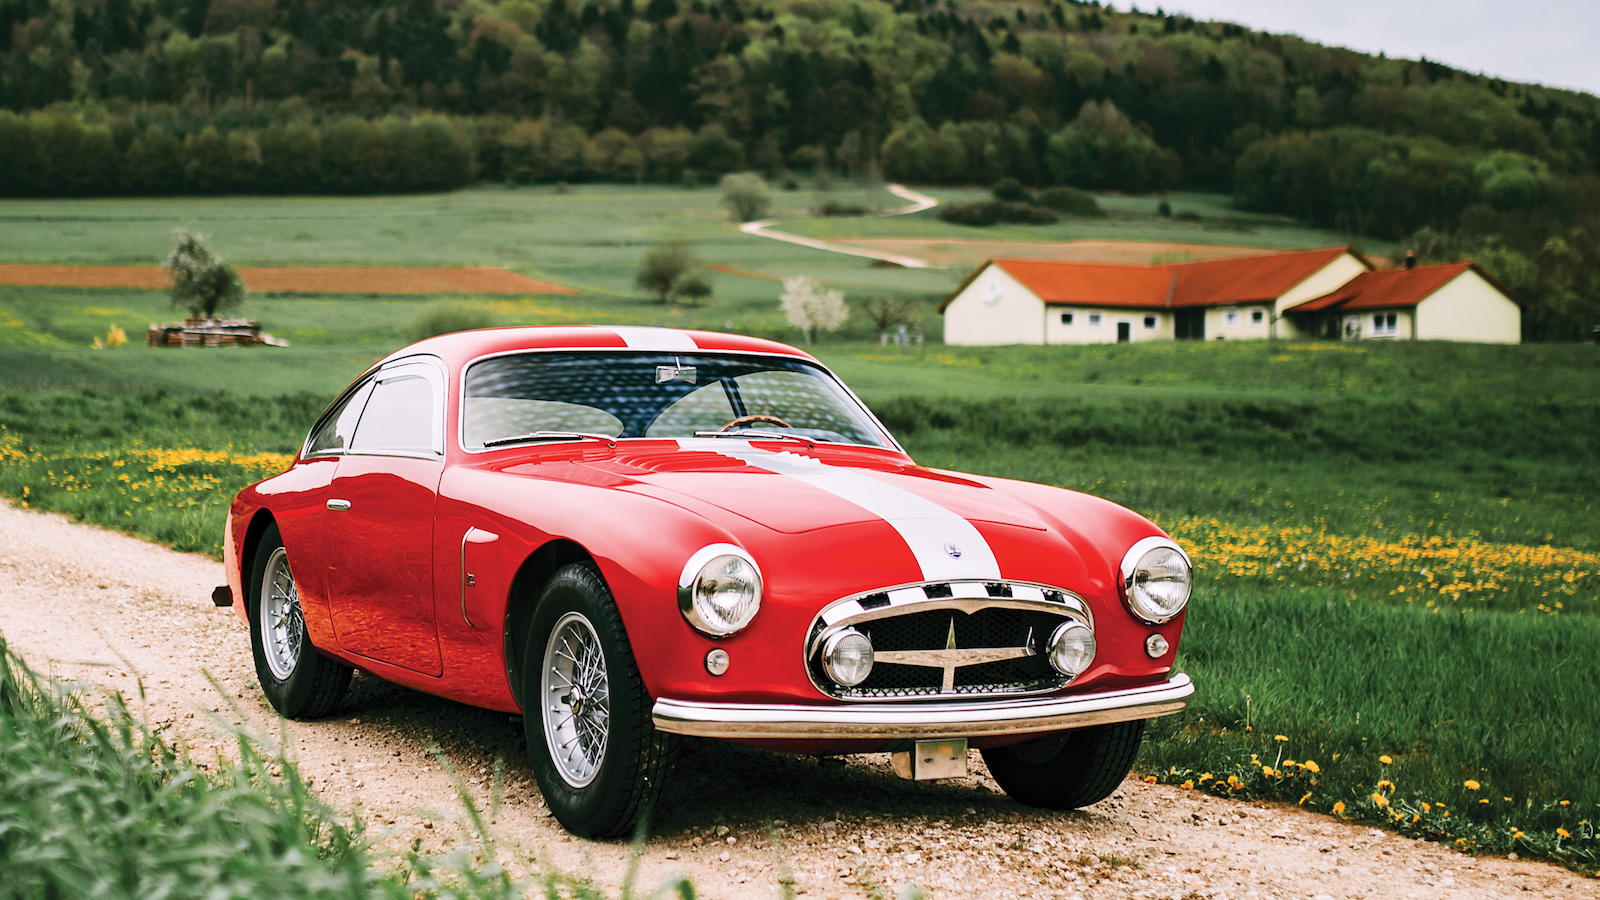 21 of the best from RM Sotheby’s Villa Erba sale